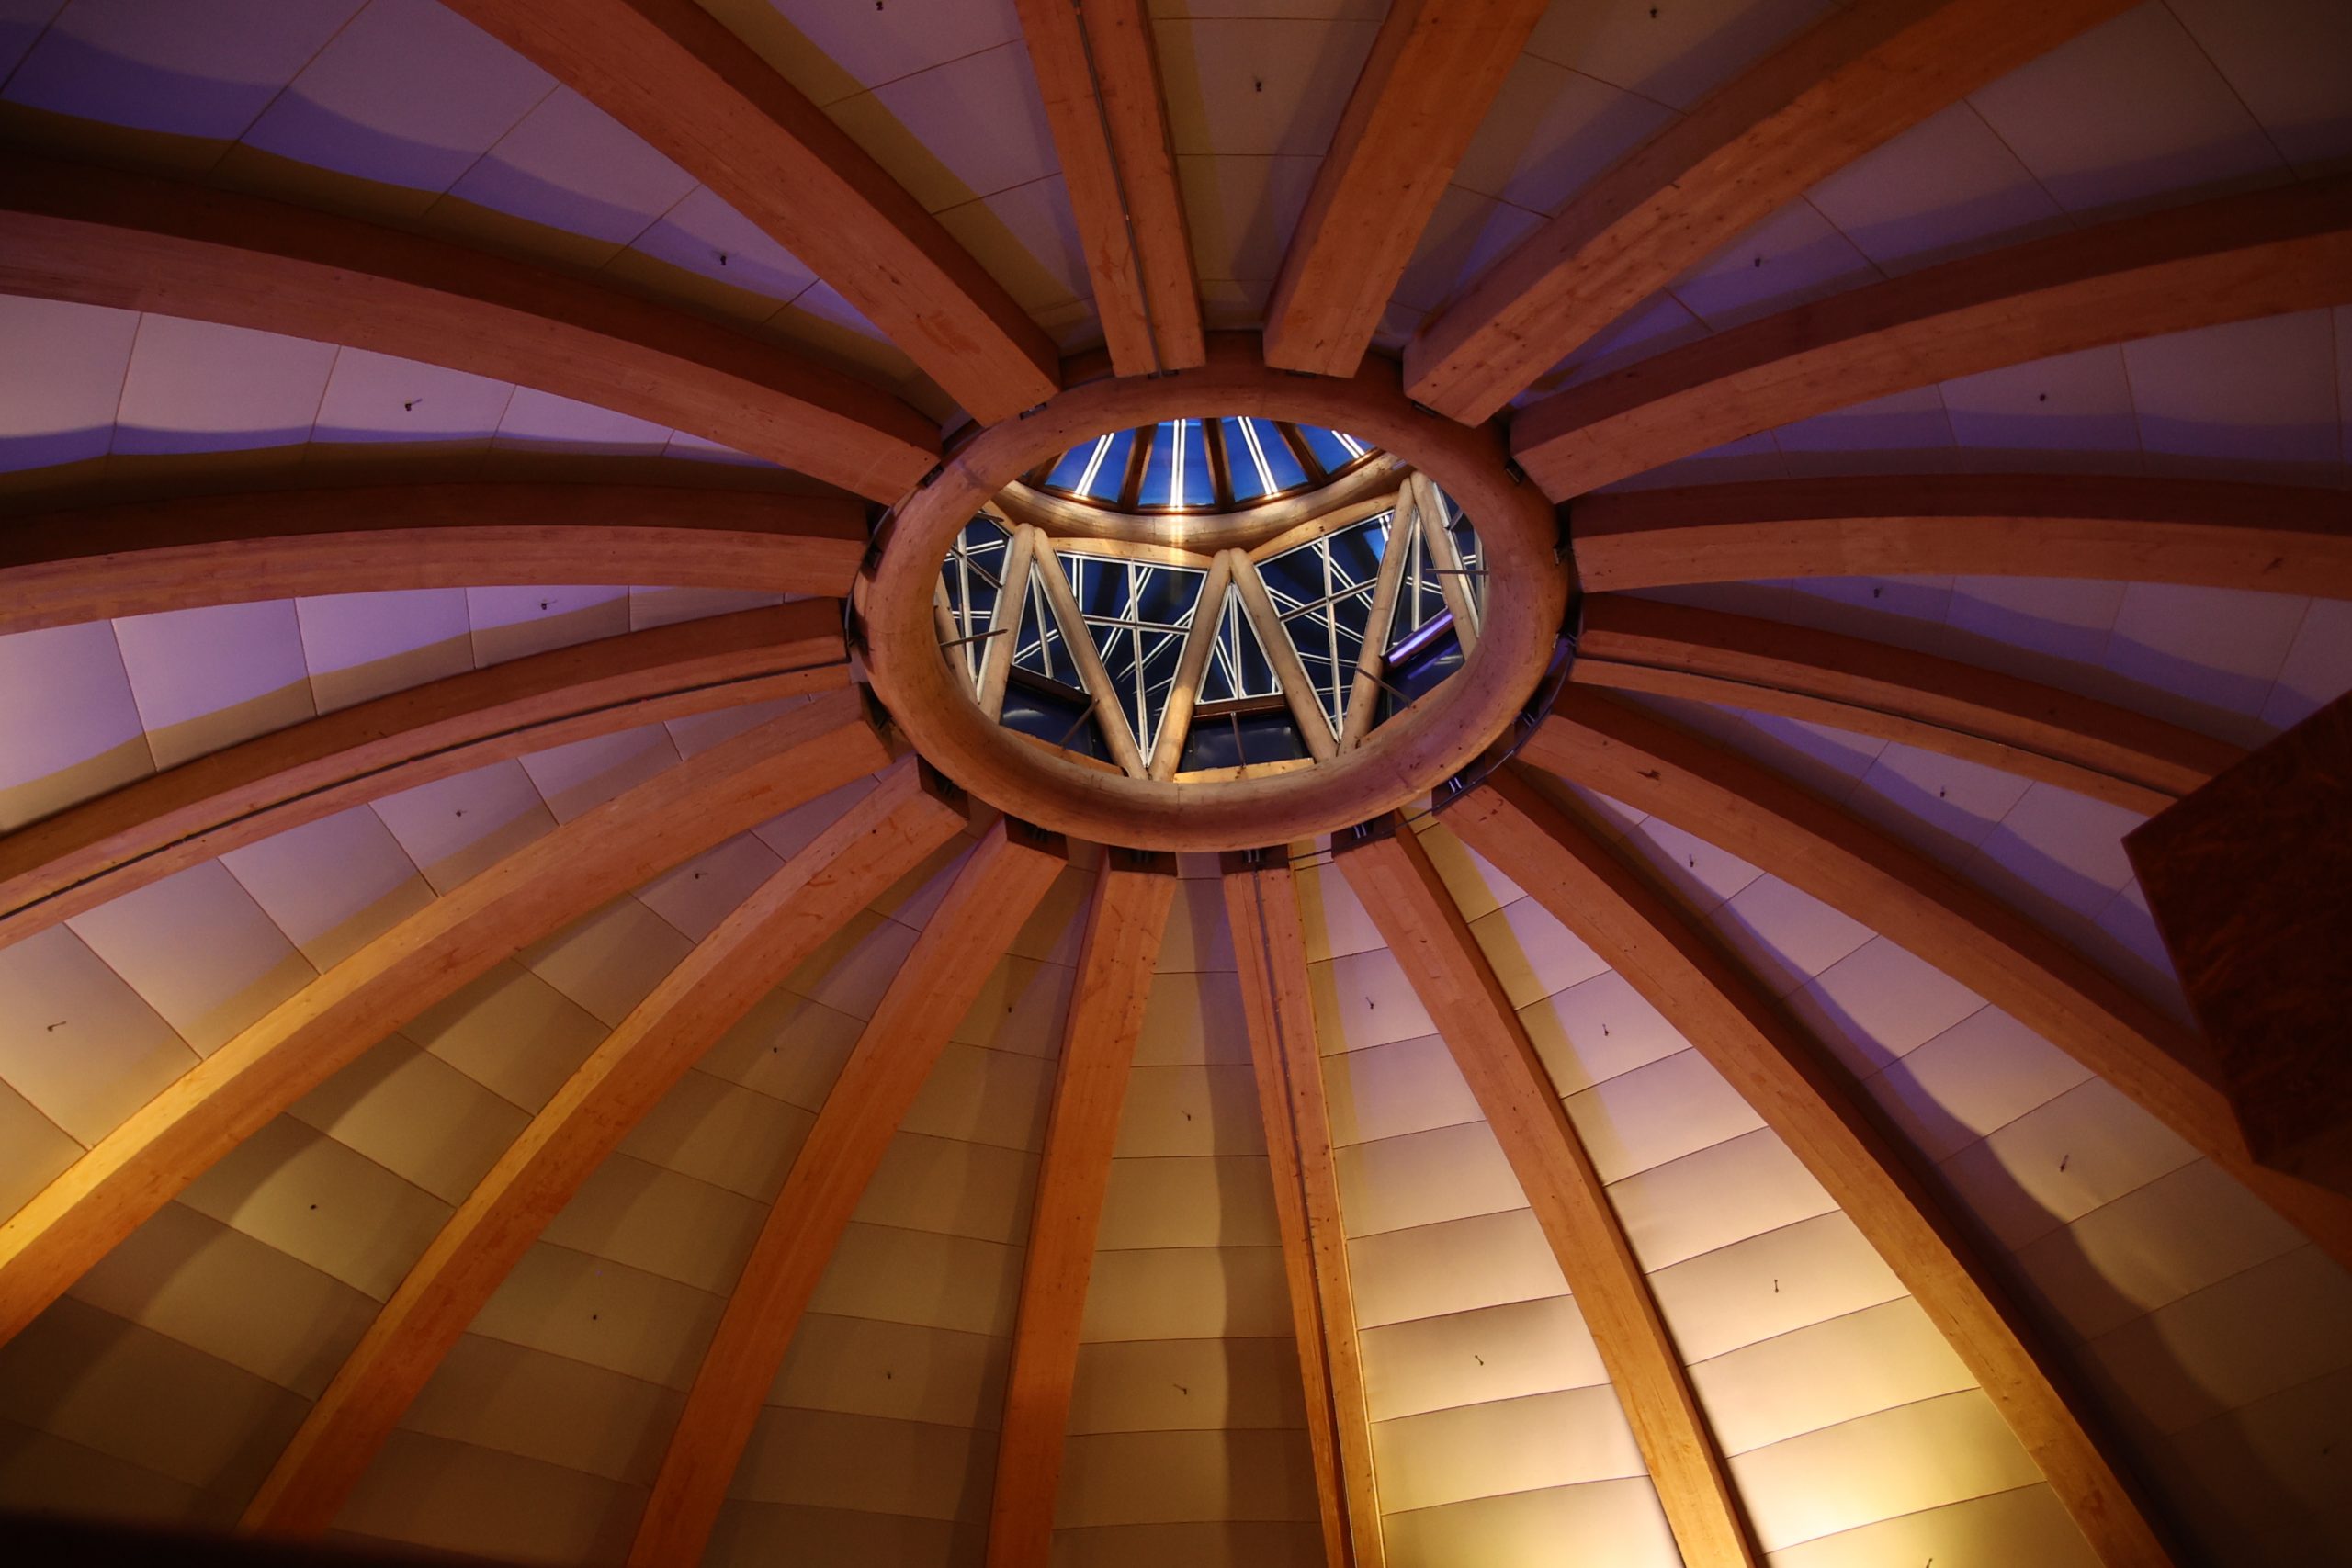 The event took place at the Globe of Science at CERN